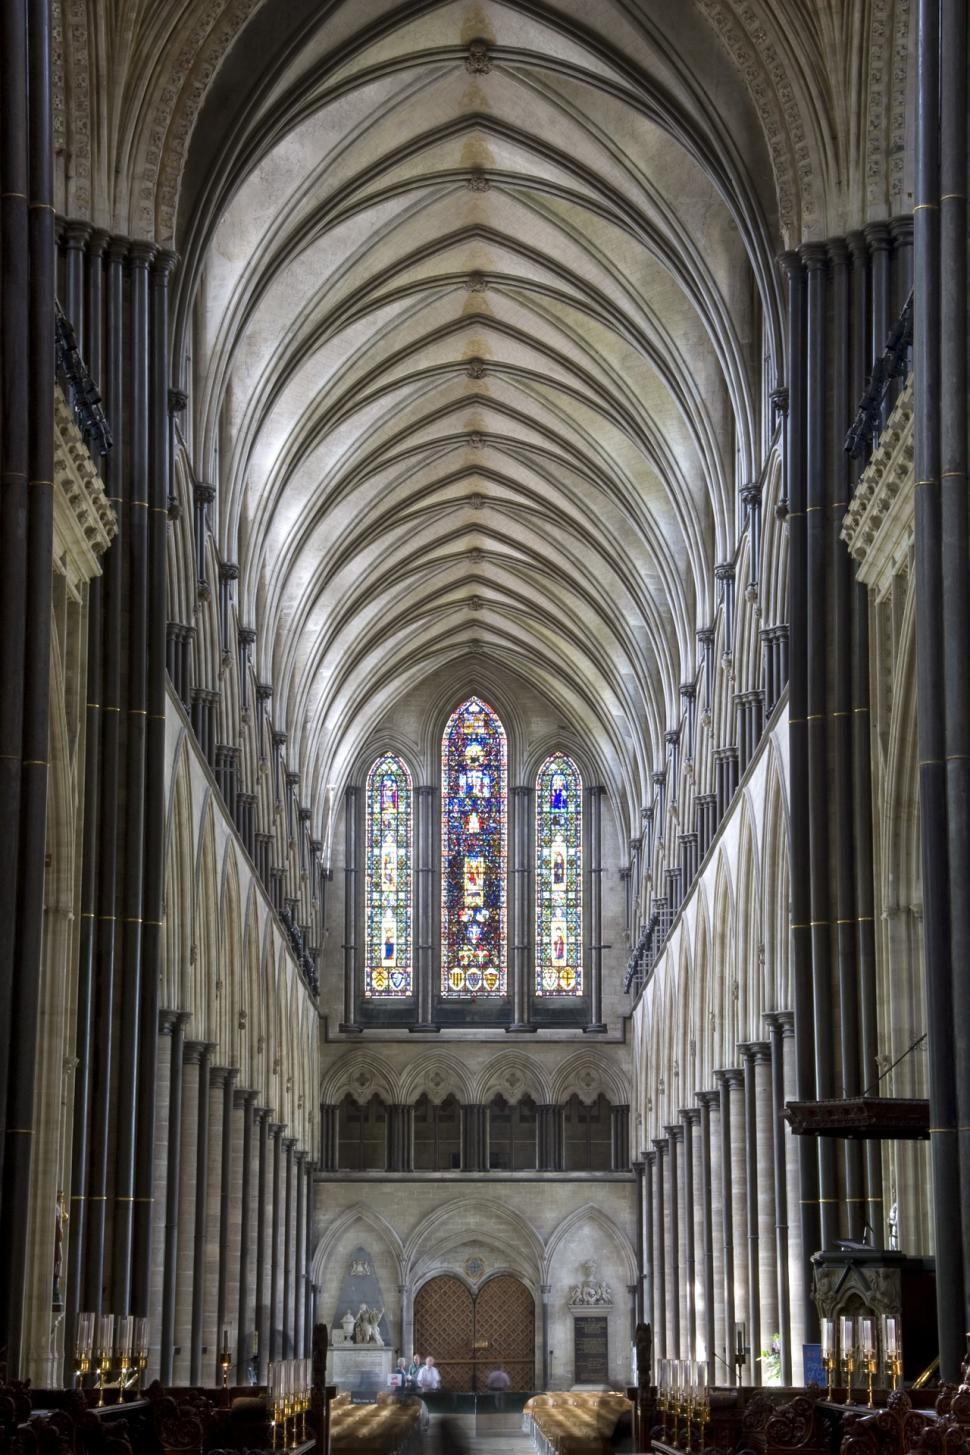 Free Image of Inside of a Cathedral With Pews and Stained Glass Windows 